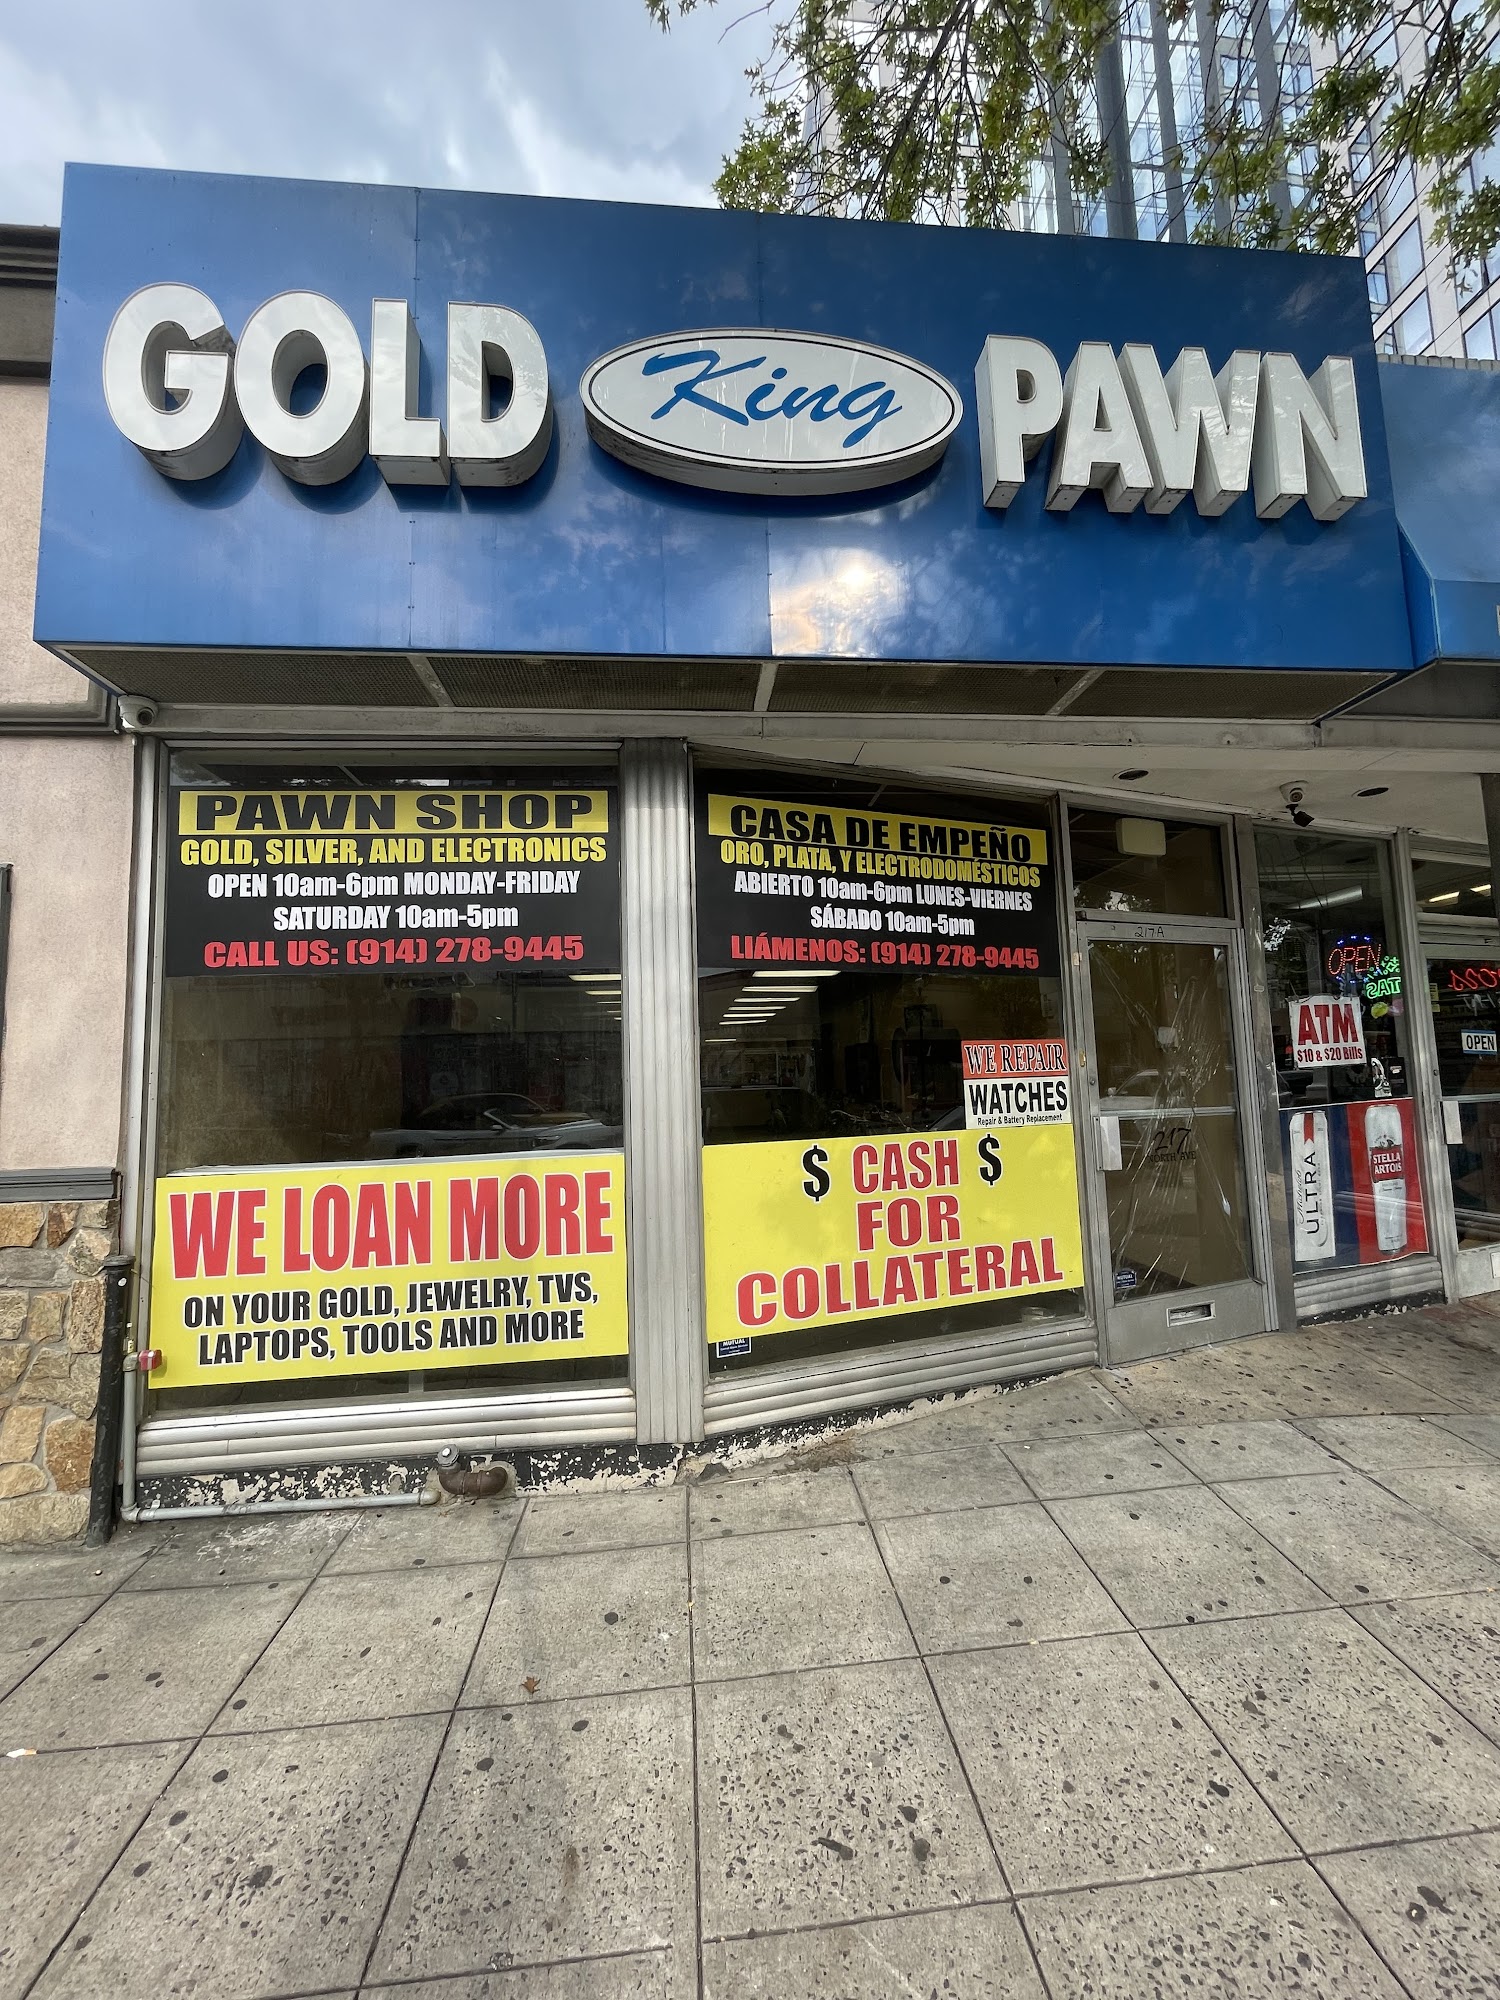 King Gold and Pawn